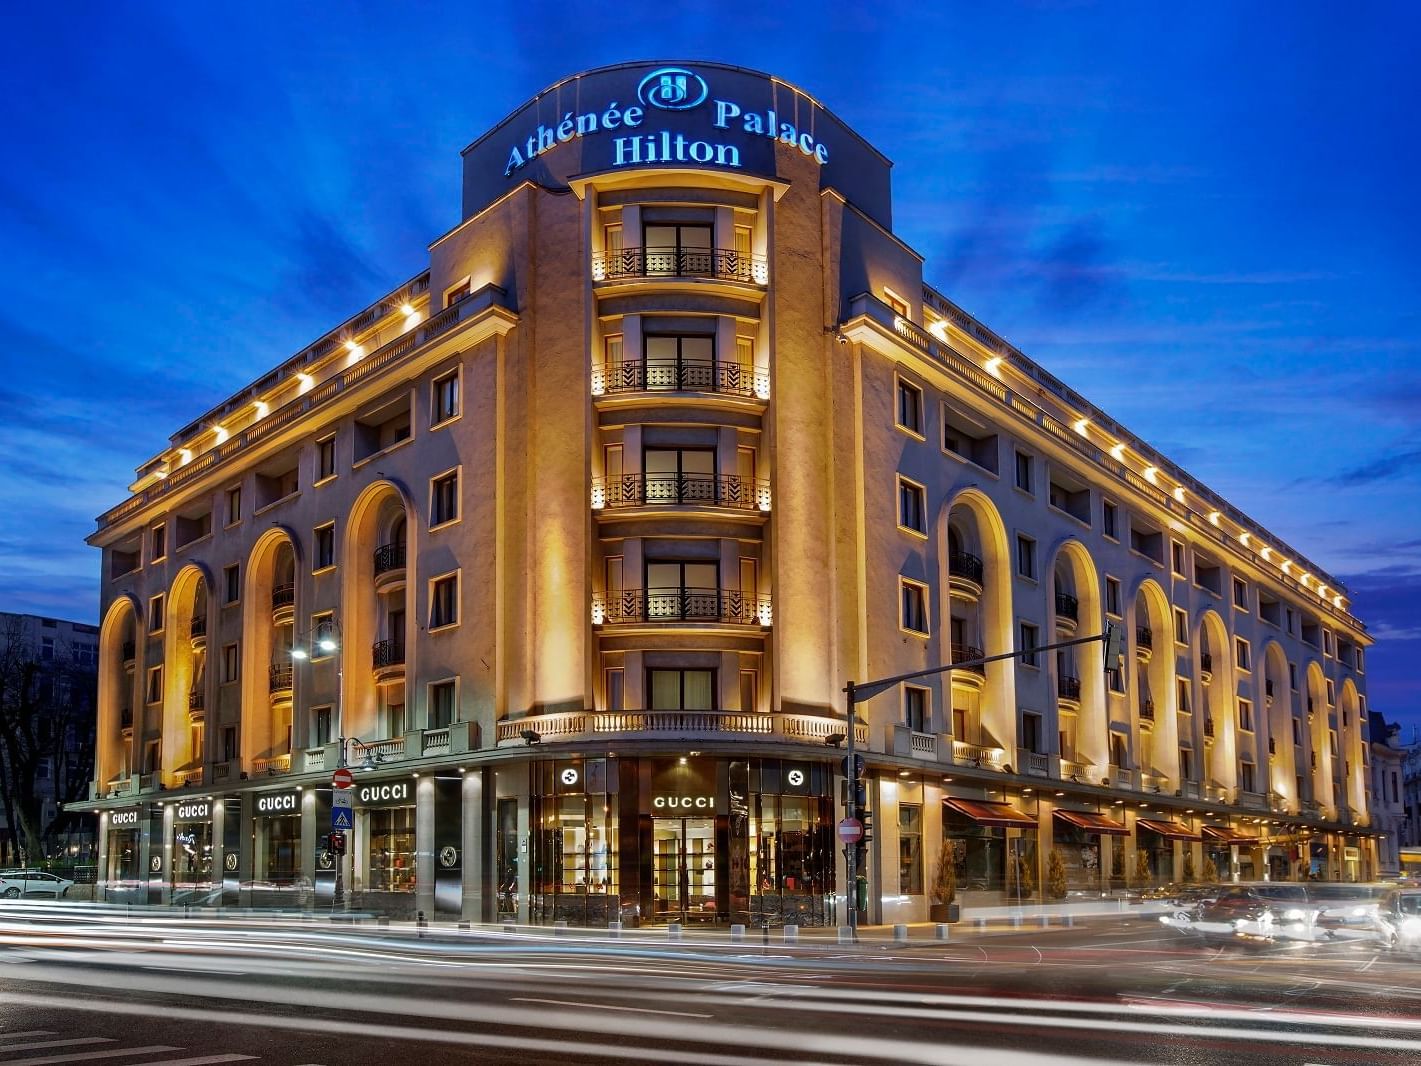 Exterior view of the Hotel at Athenee Palace Hilton Bucharest